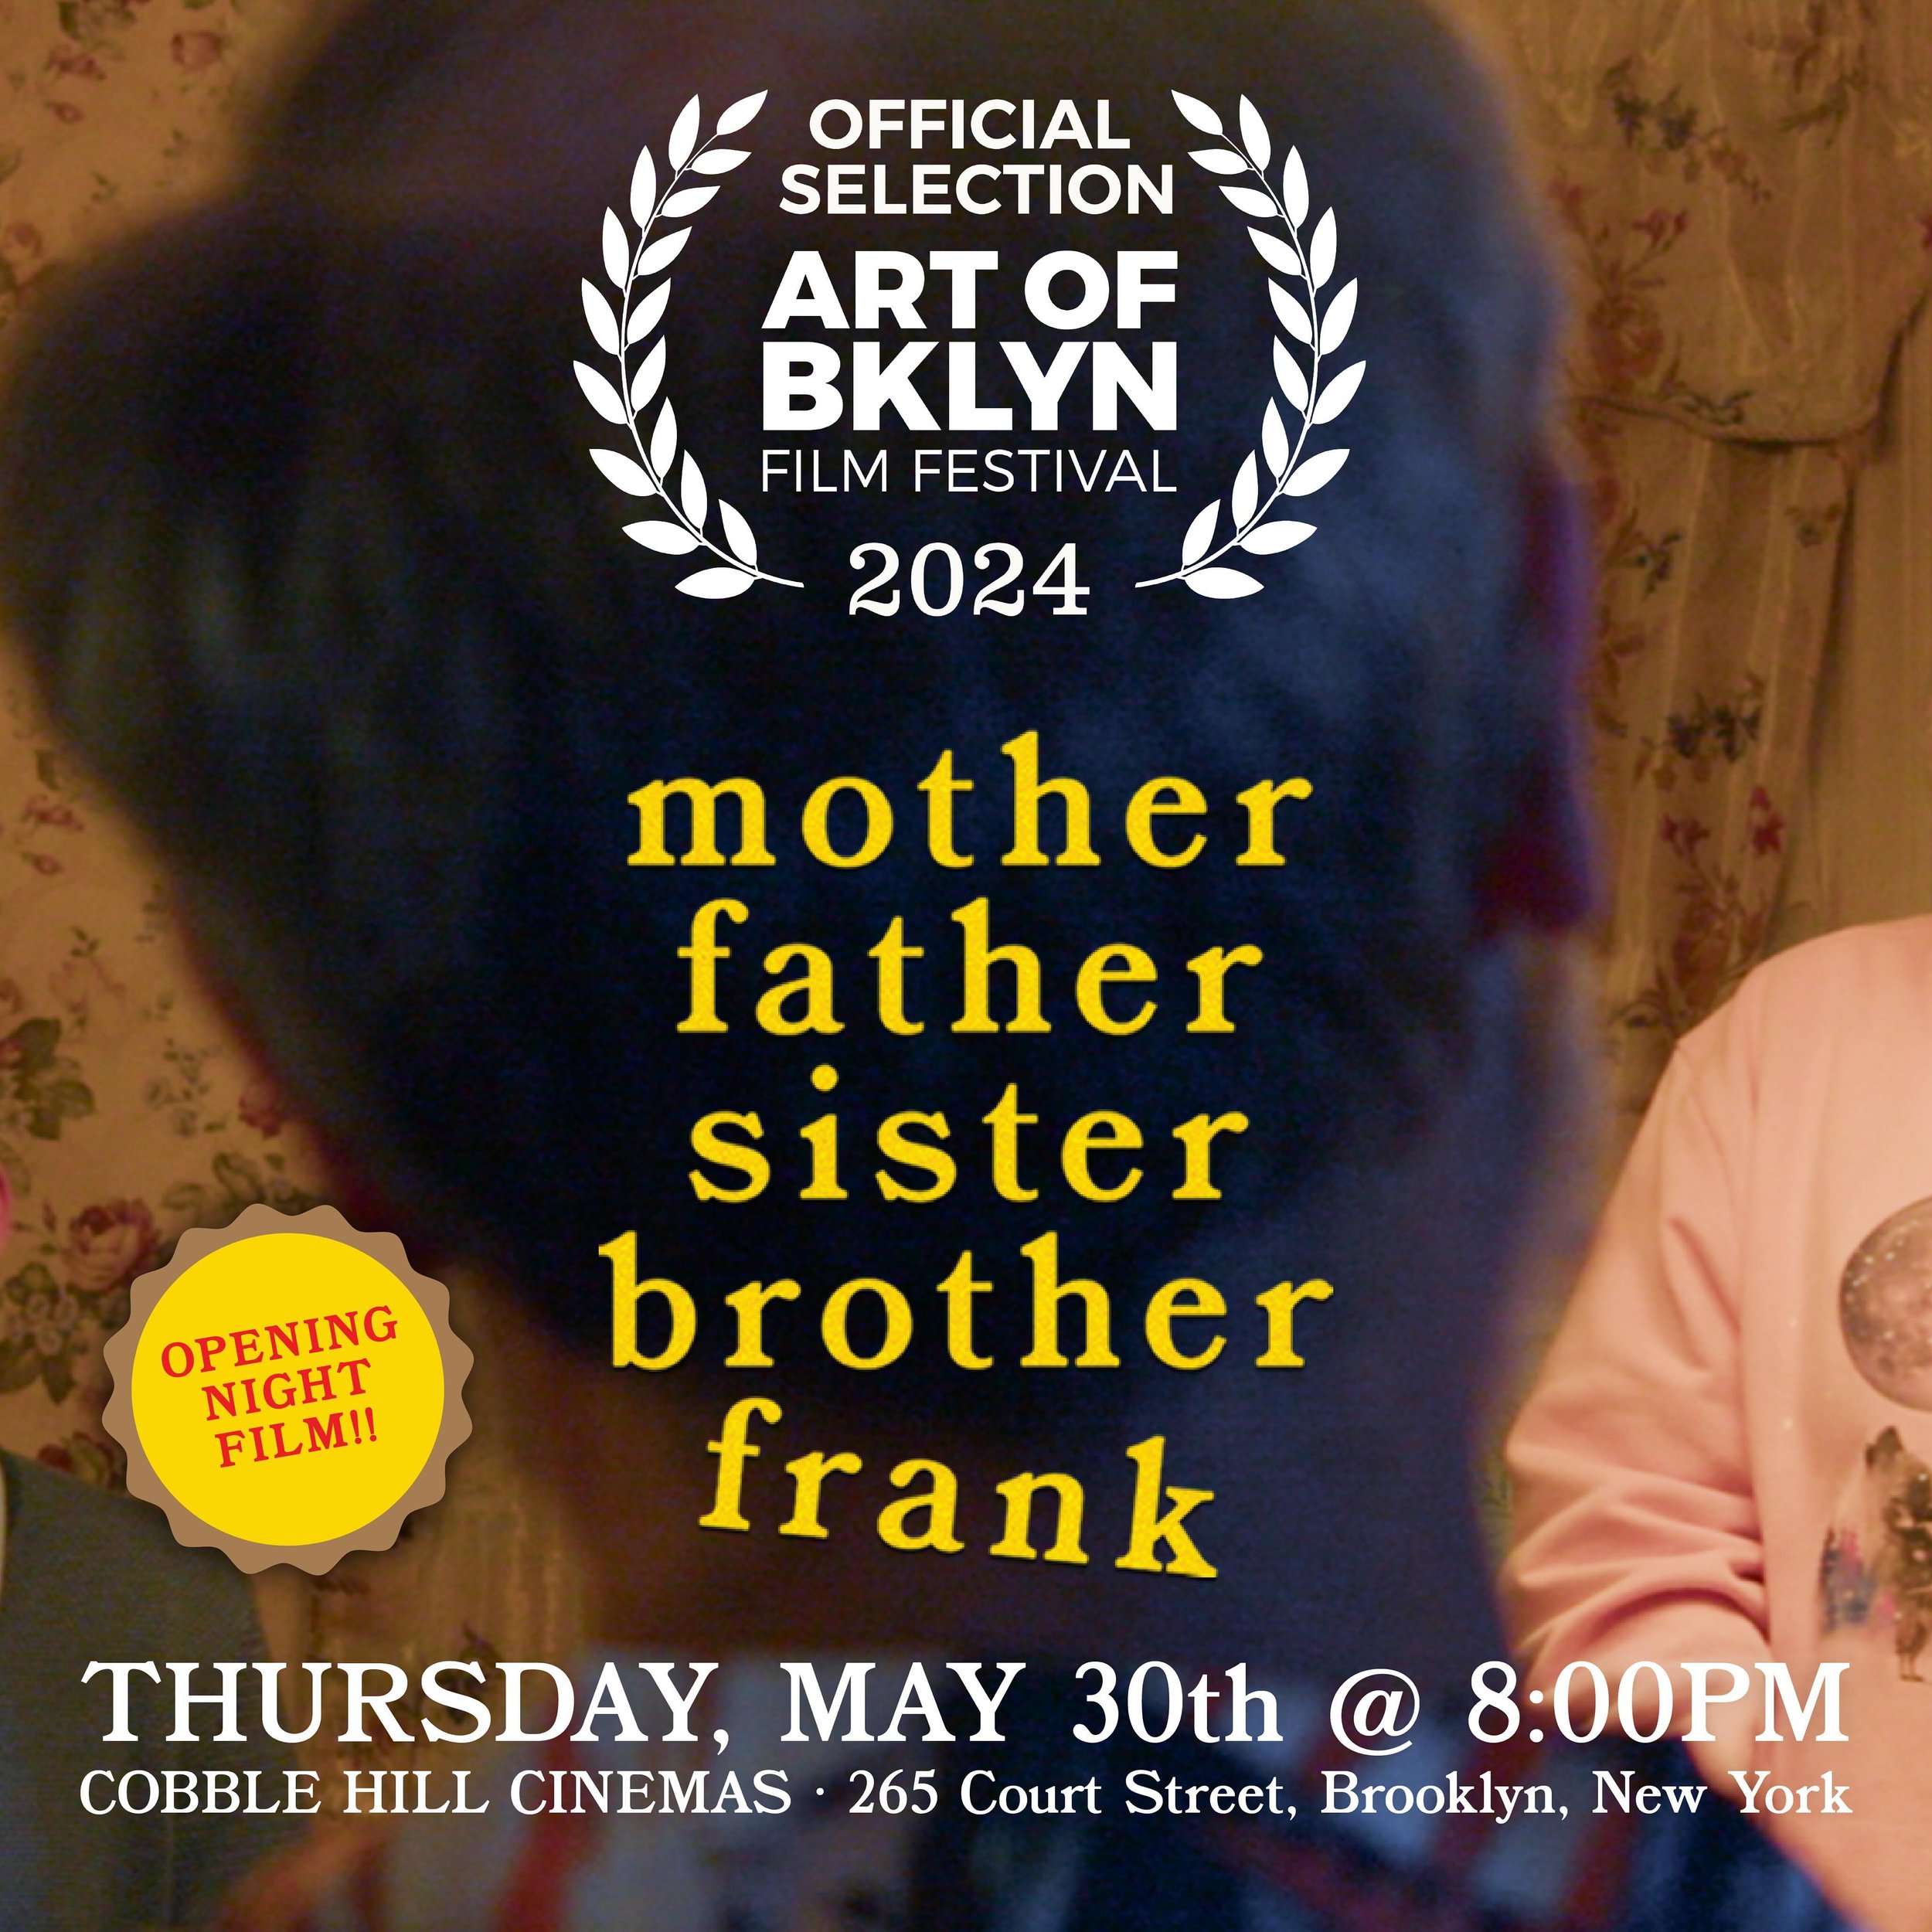 MFSBF Screening times @theartofbklyn !!
🎞️🥳 OPENING NIGHT FILM!! 🥳🎞️ 
THURSDAY, May 30th @ 8:00 PM
Link for tix in our bio!!
🔪☠️🥧 #MFSBF
.
Mindy Cohn and Enrico Colantoni in MOTHER FATHER SISTER BROTHER FRANK
.
.
.
.
.
.
Written &amp; Directed 